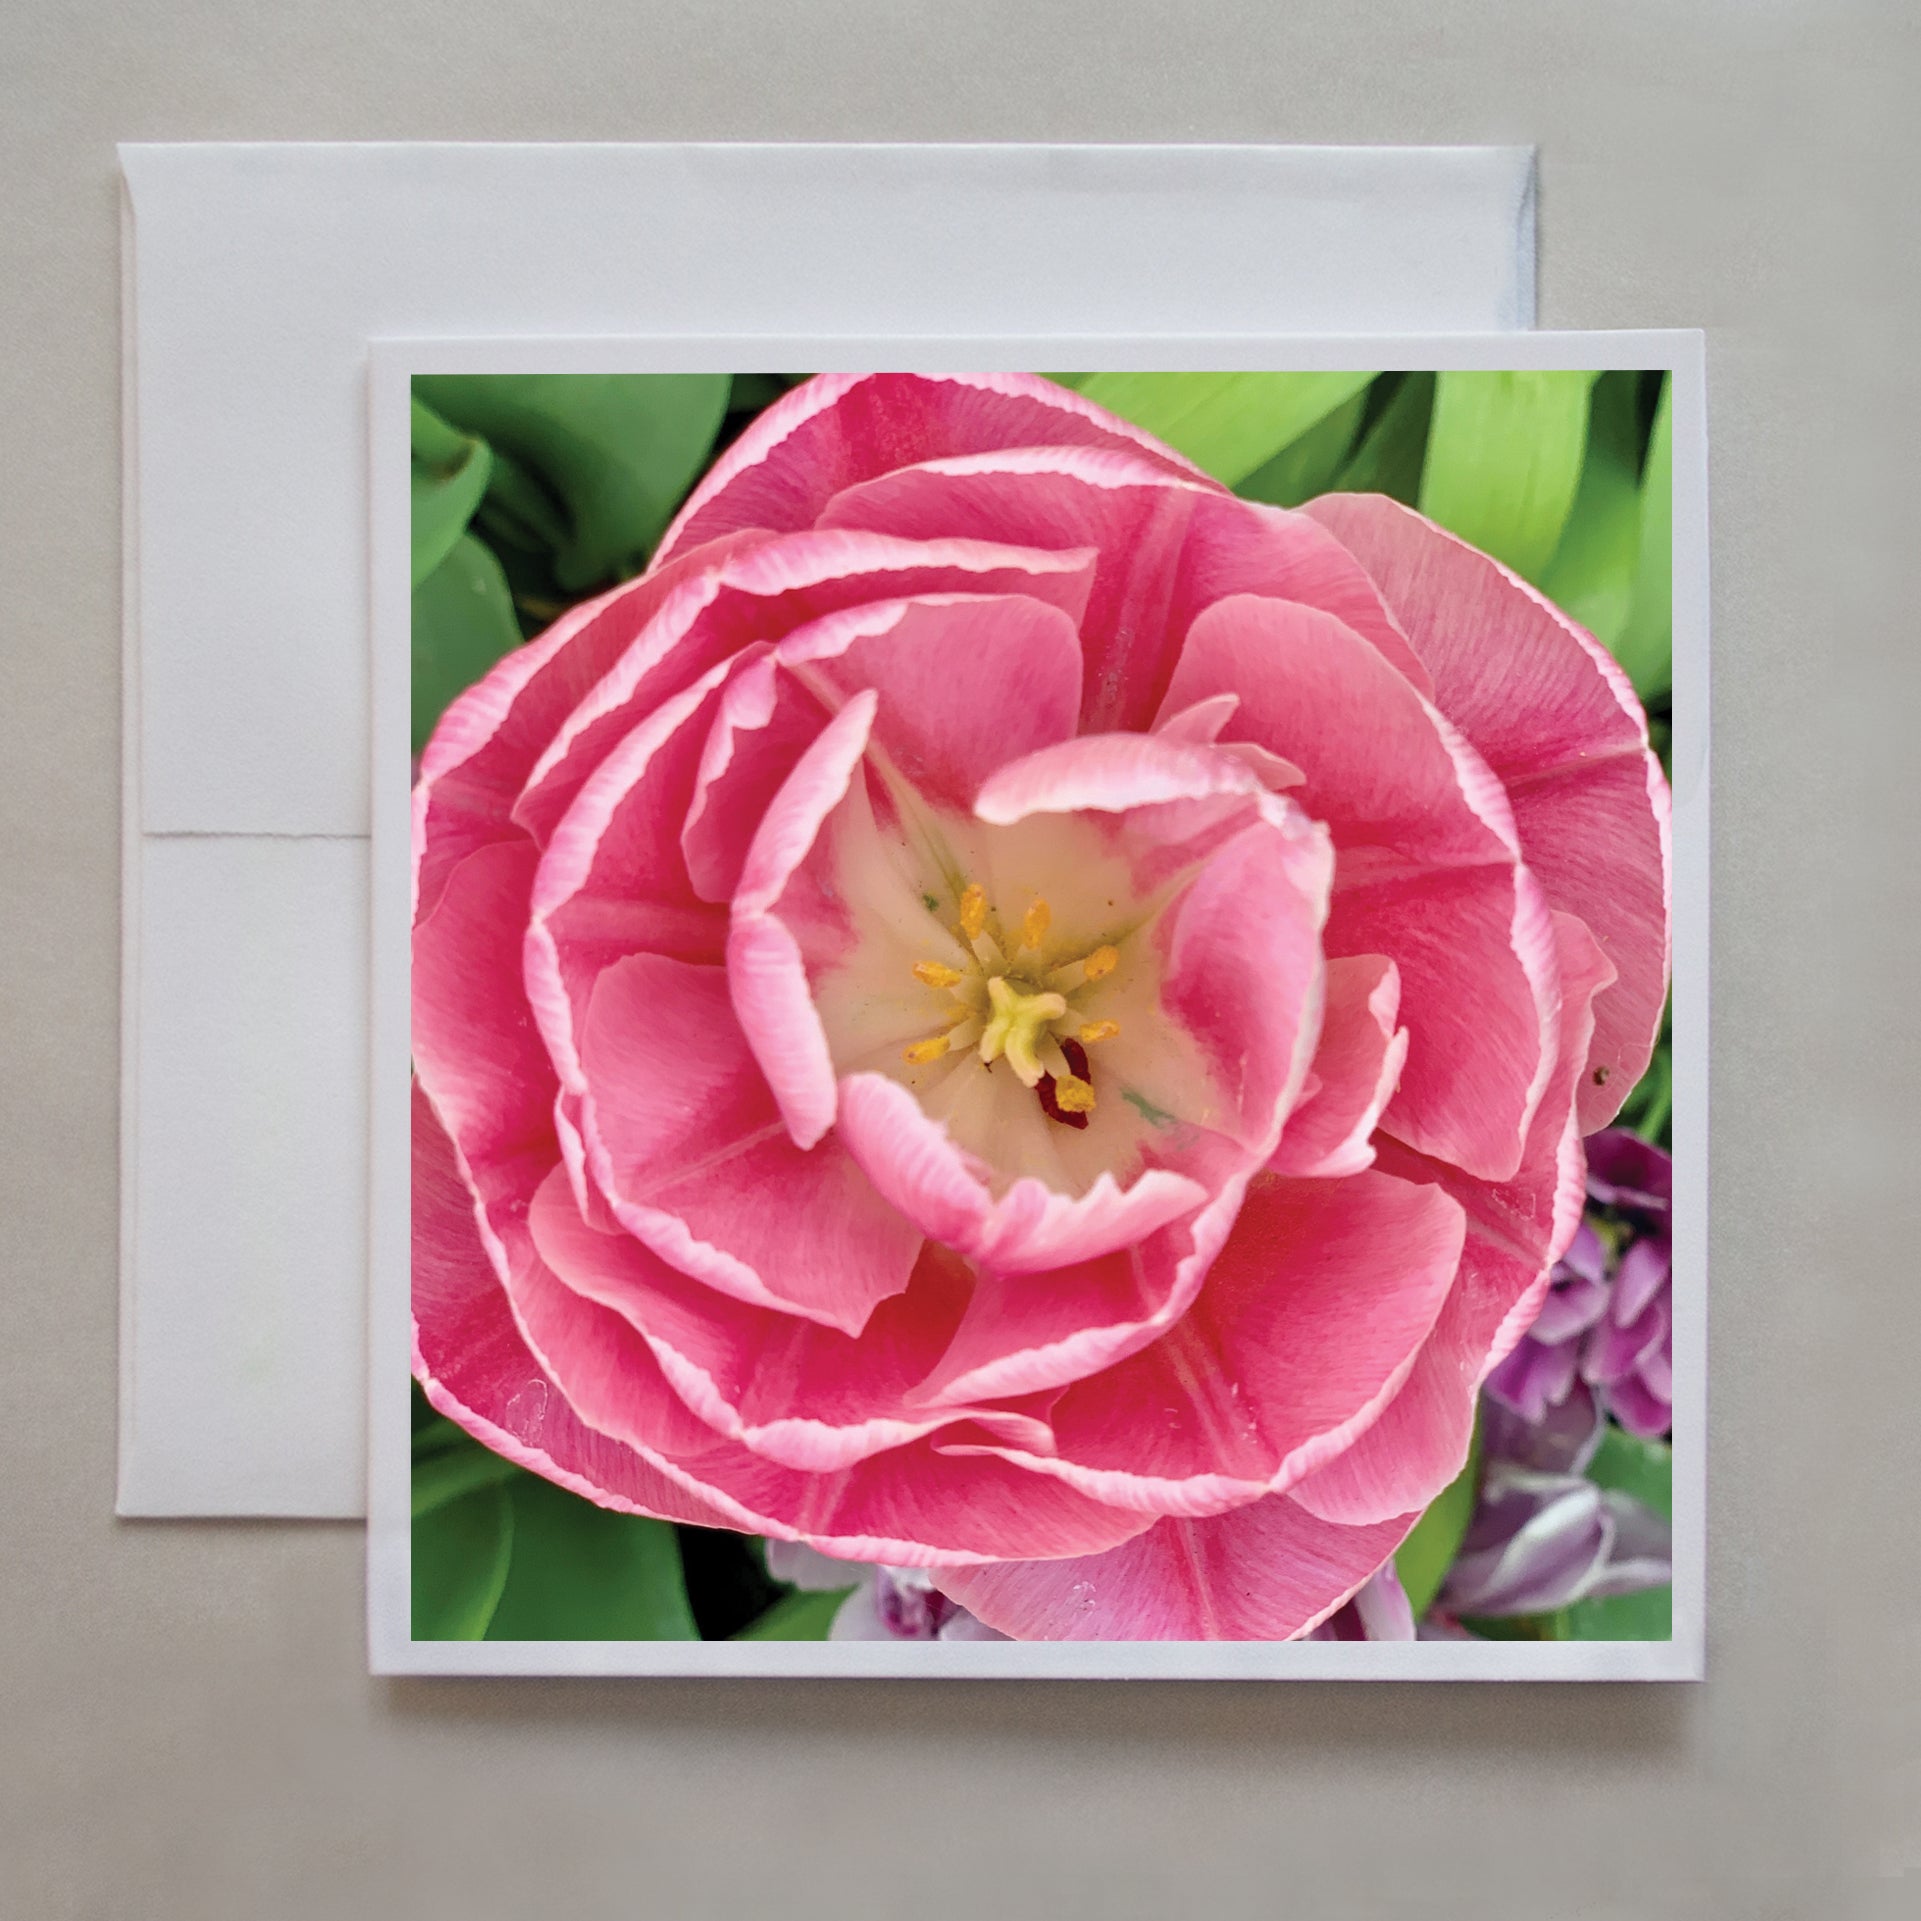 This photo card shows details of the pink flower, Didier's Tulip by Toronto photographer, Caley Taylor.